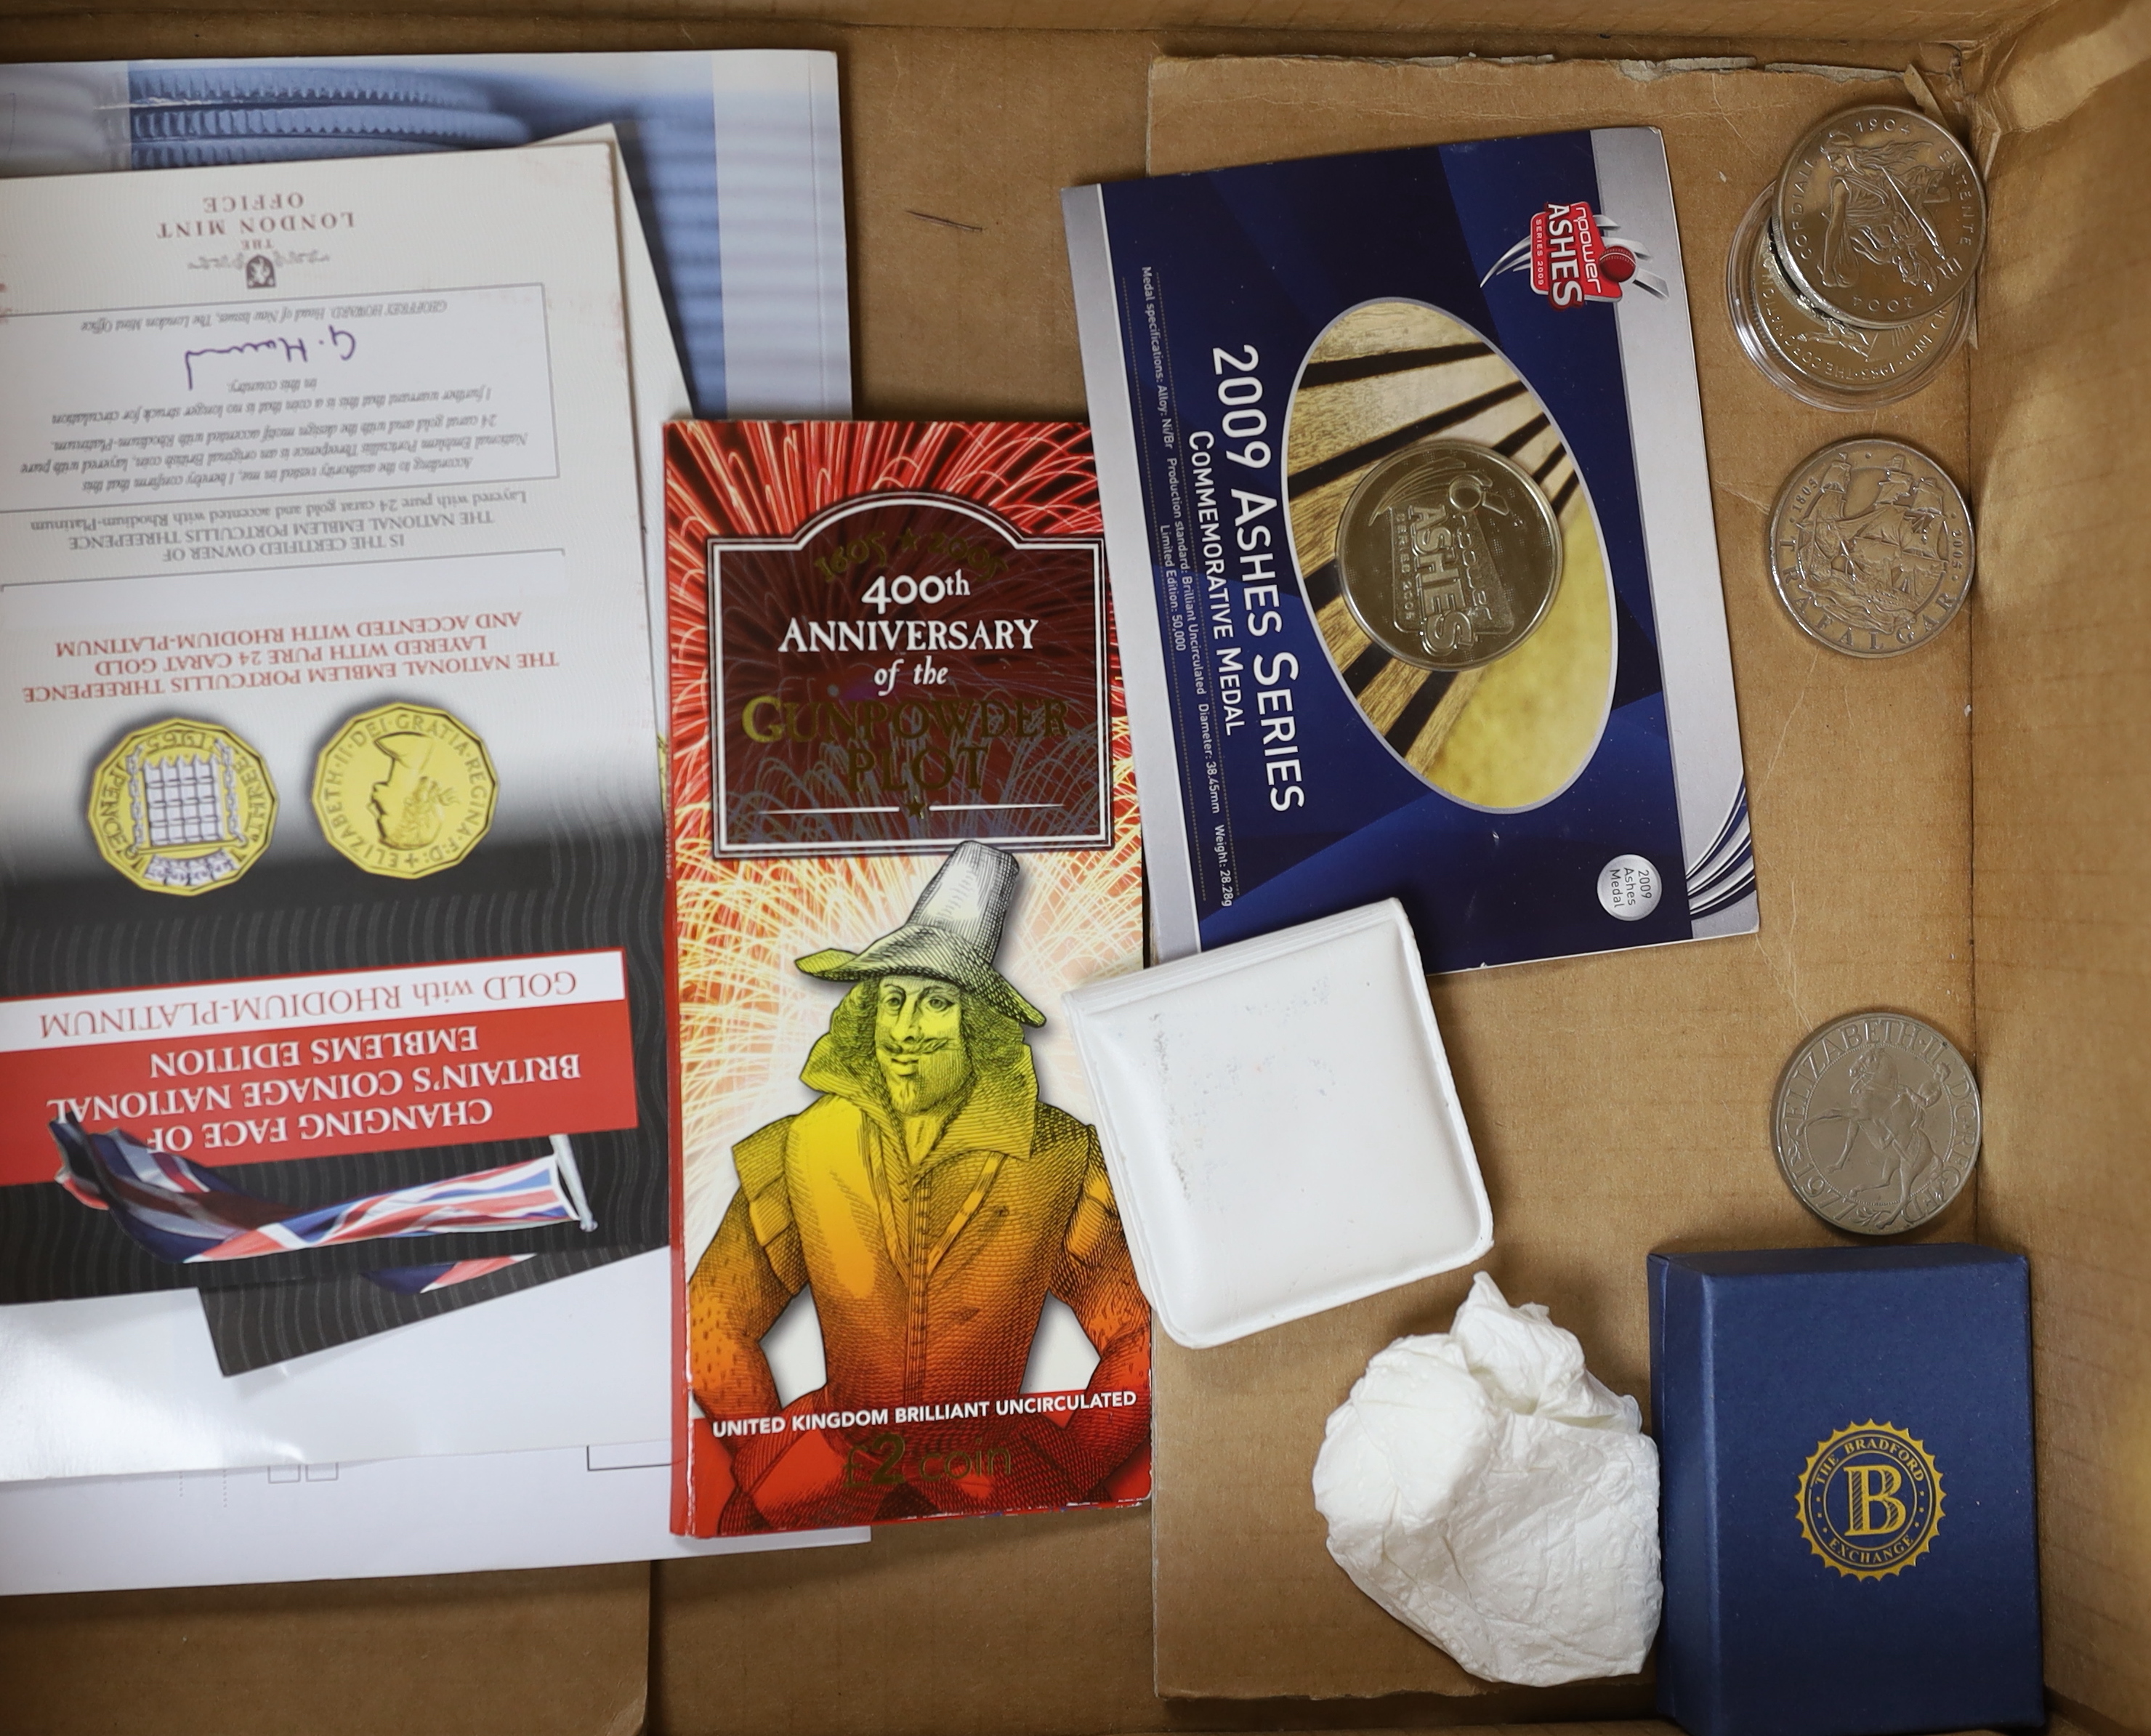 QEII coin issues - The London Mint office Britannia £5 coin and banknote tribute set, The 2008 & undated 20p coin set French, changing face of Britain’s coinage national emblems edition, Royal Mint 2012 Olympics 50p cycl